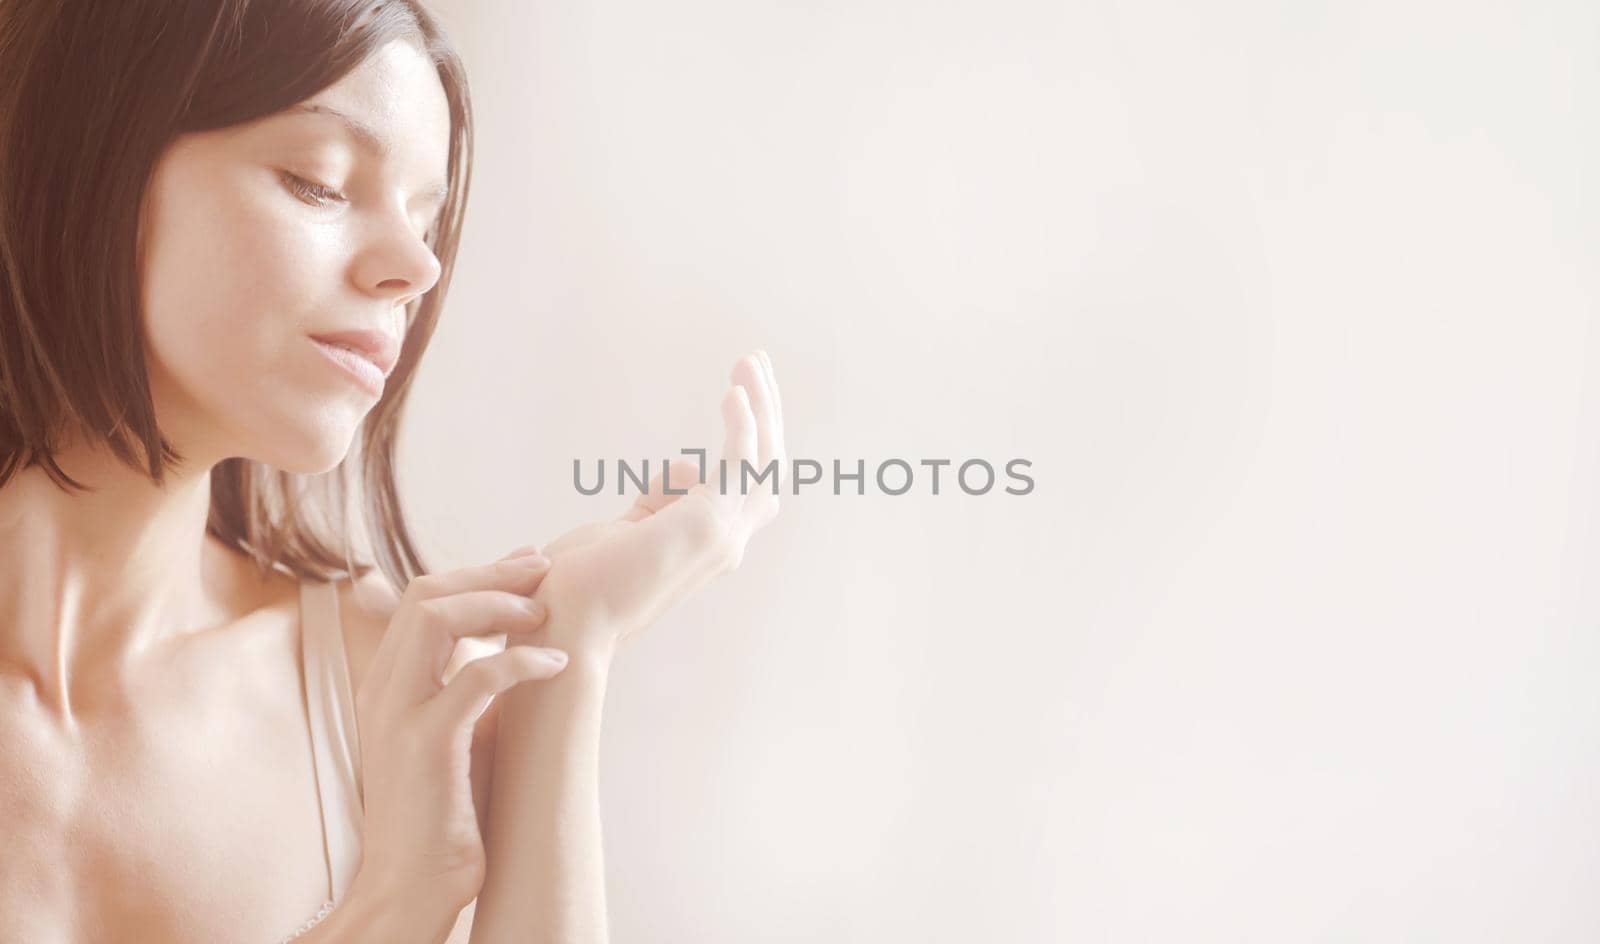 A young girl takes care of the health of her skin in the bathroom, a woman looks at her gentle moisturized hands on a light background.